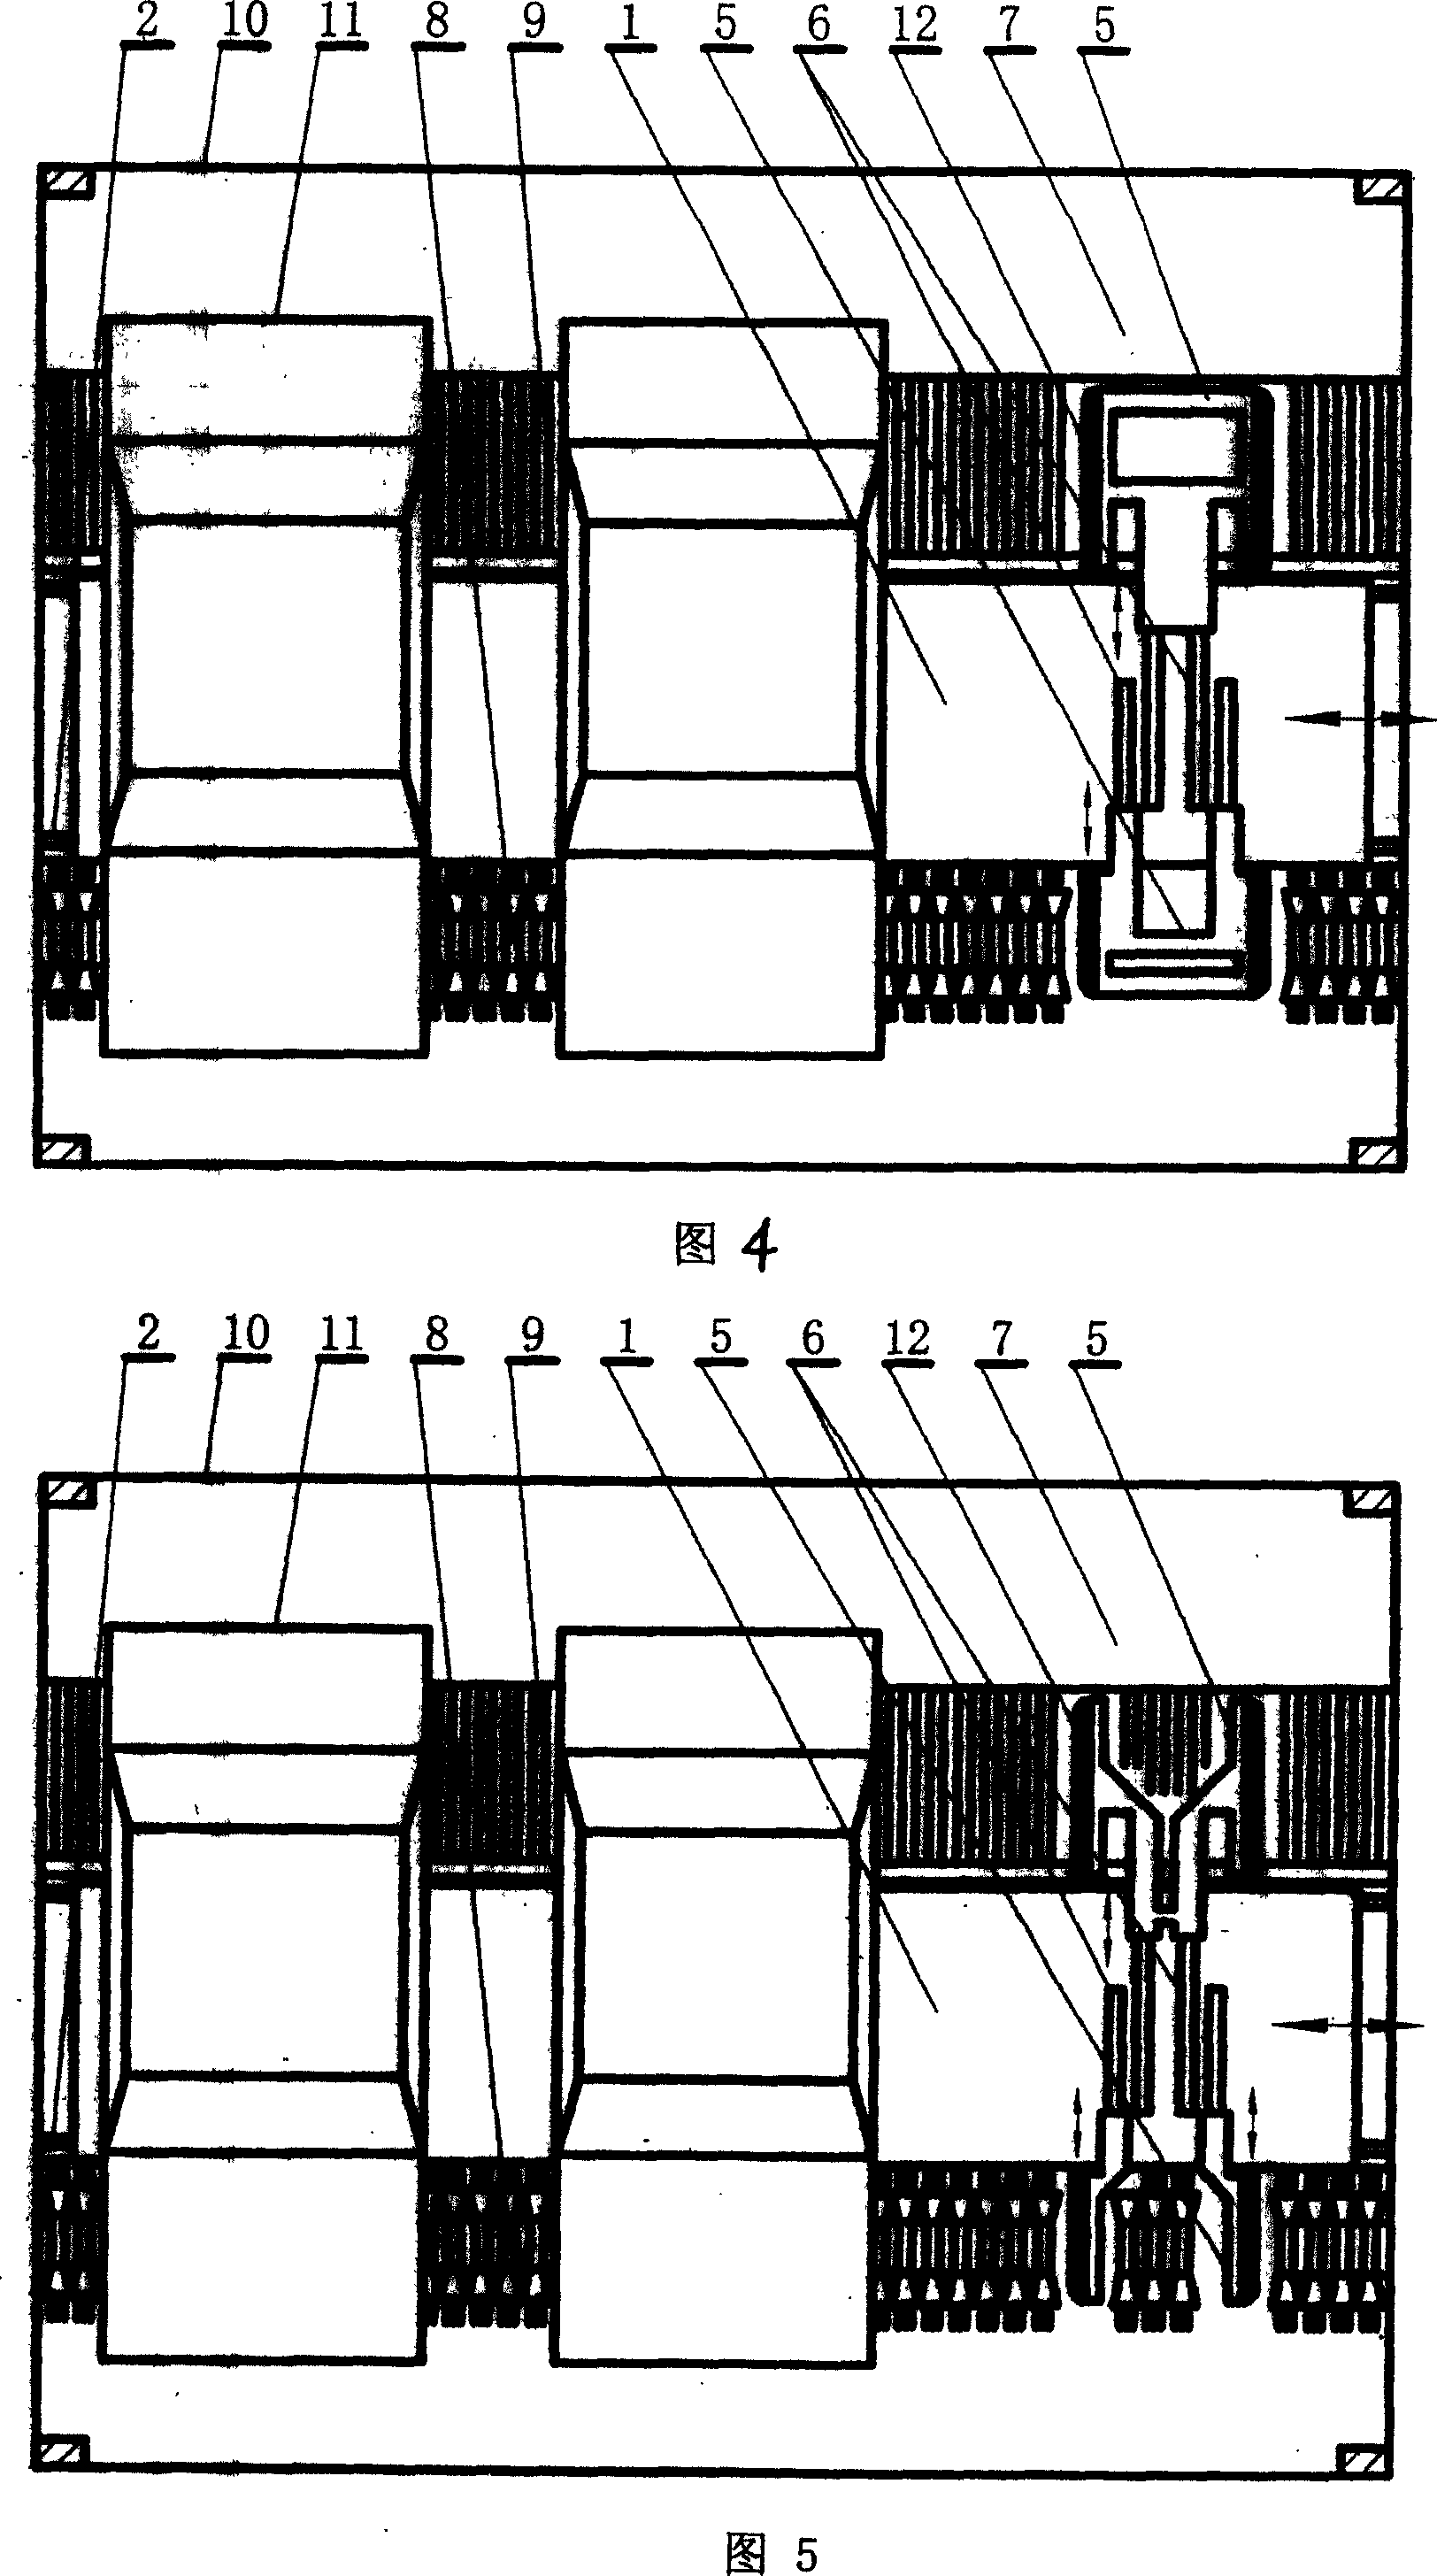 Vehicle partition-positioned transverse shifting accessing device adopting mobile positioning type activator